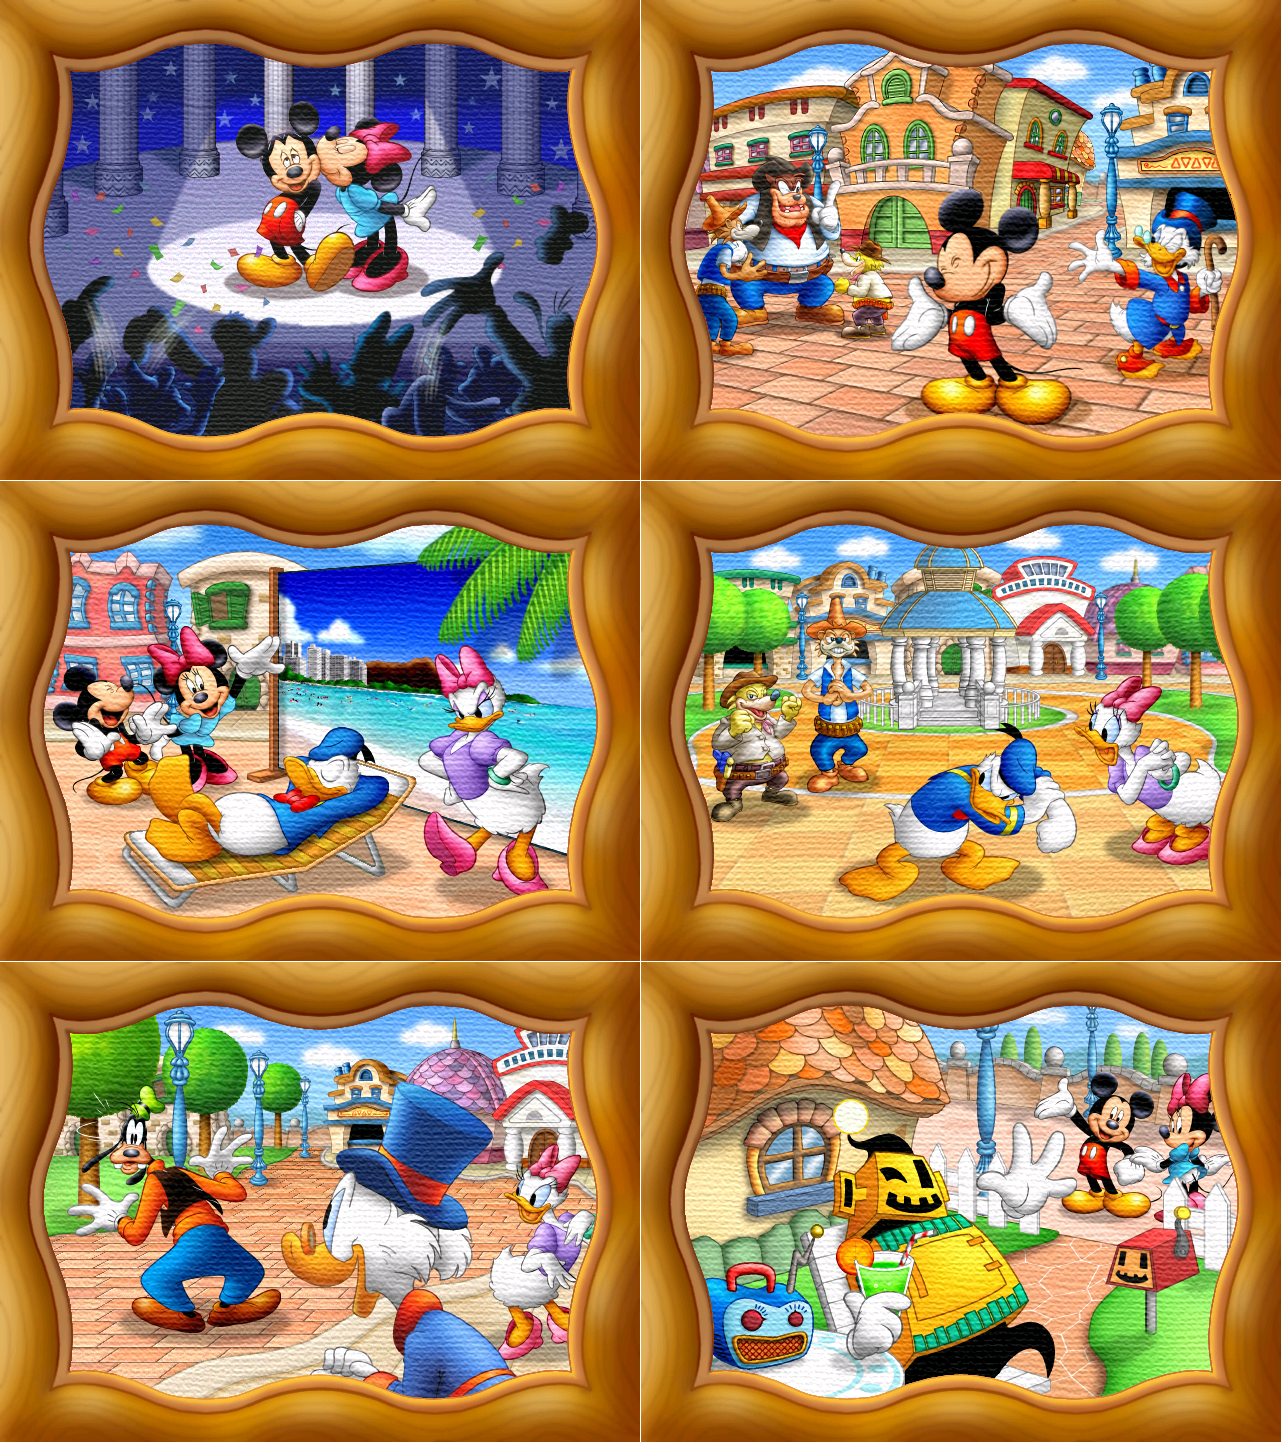 Disney's Party - Character Wish Pictures